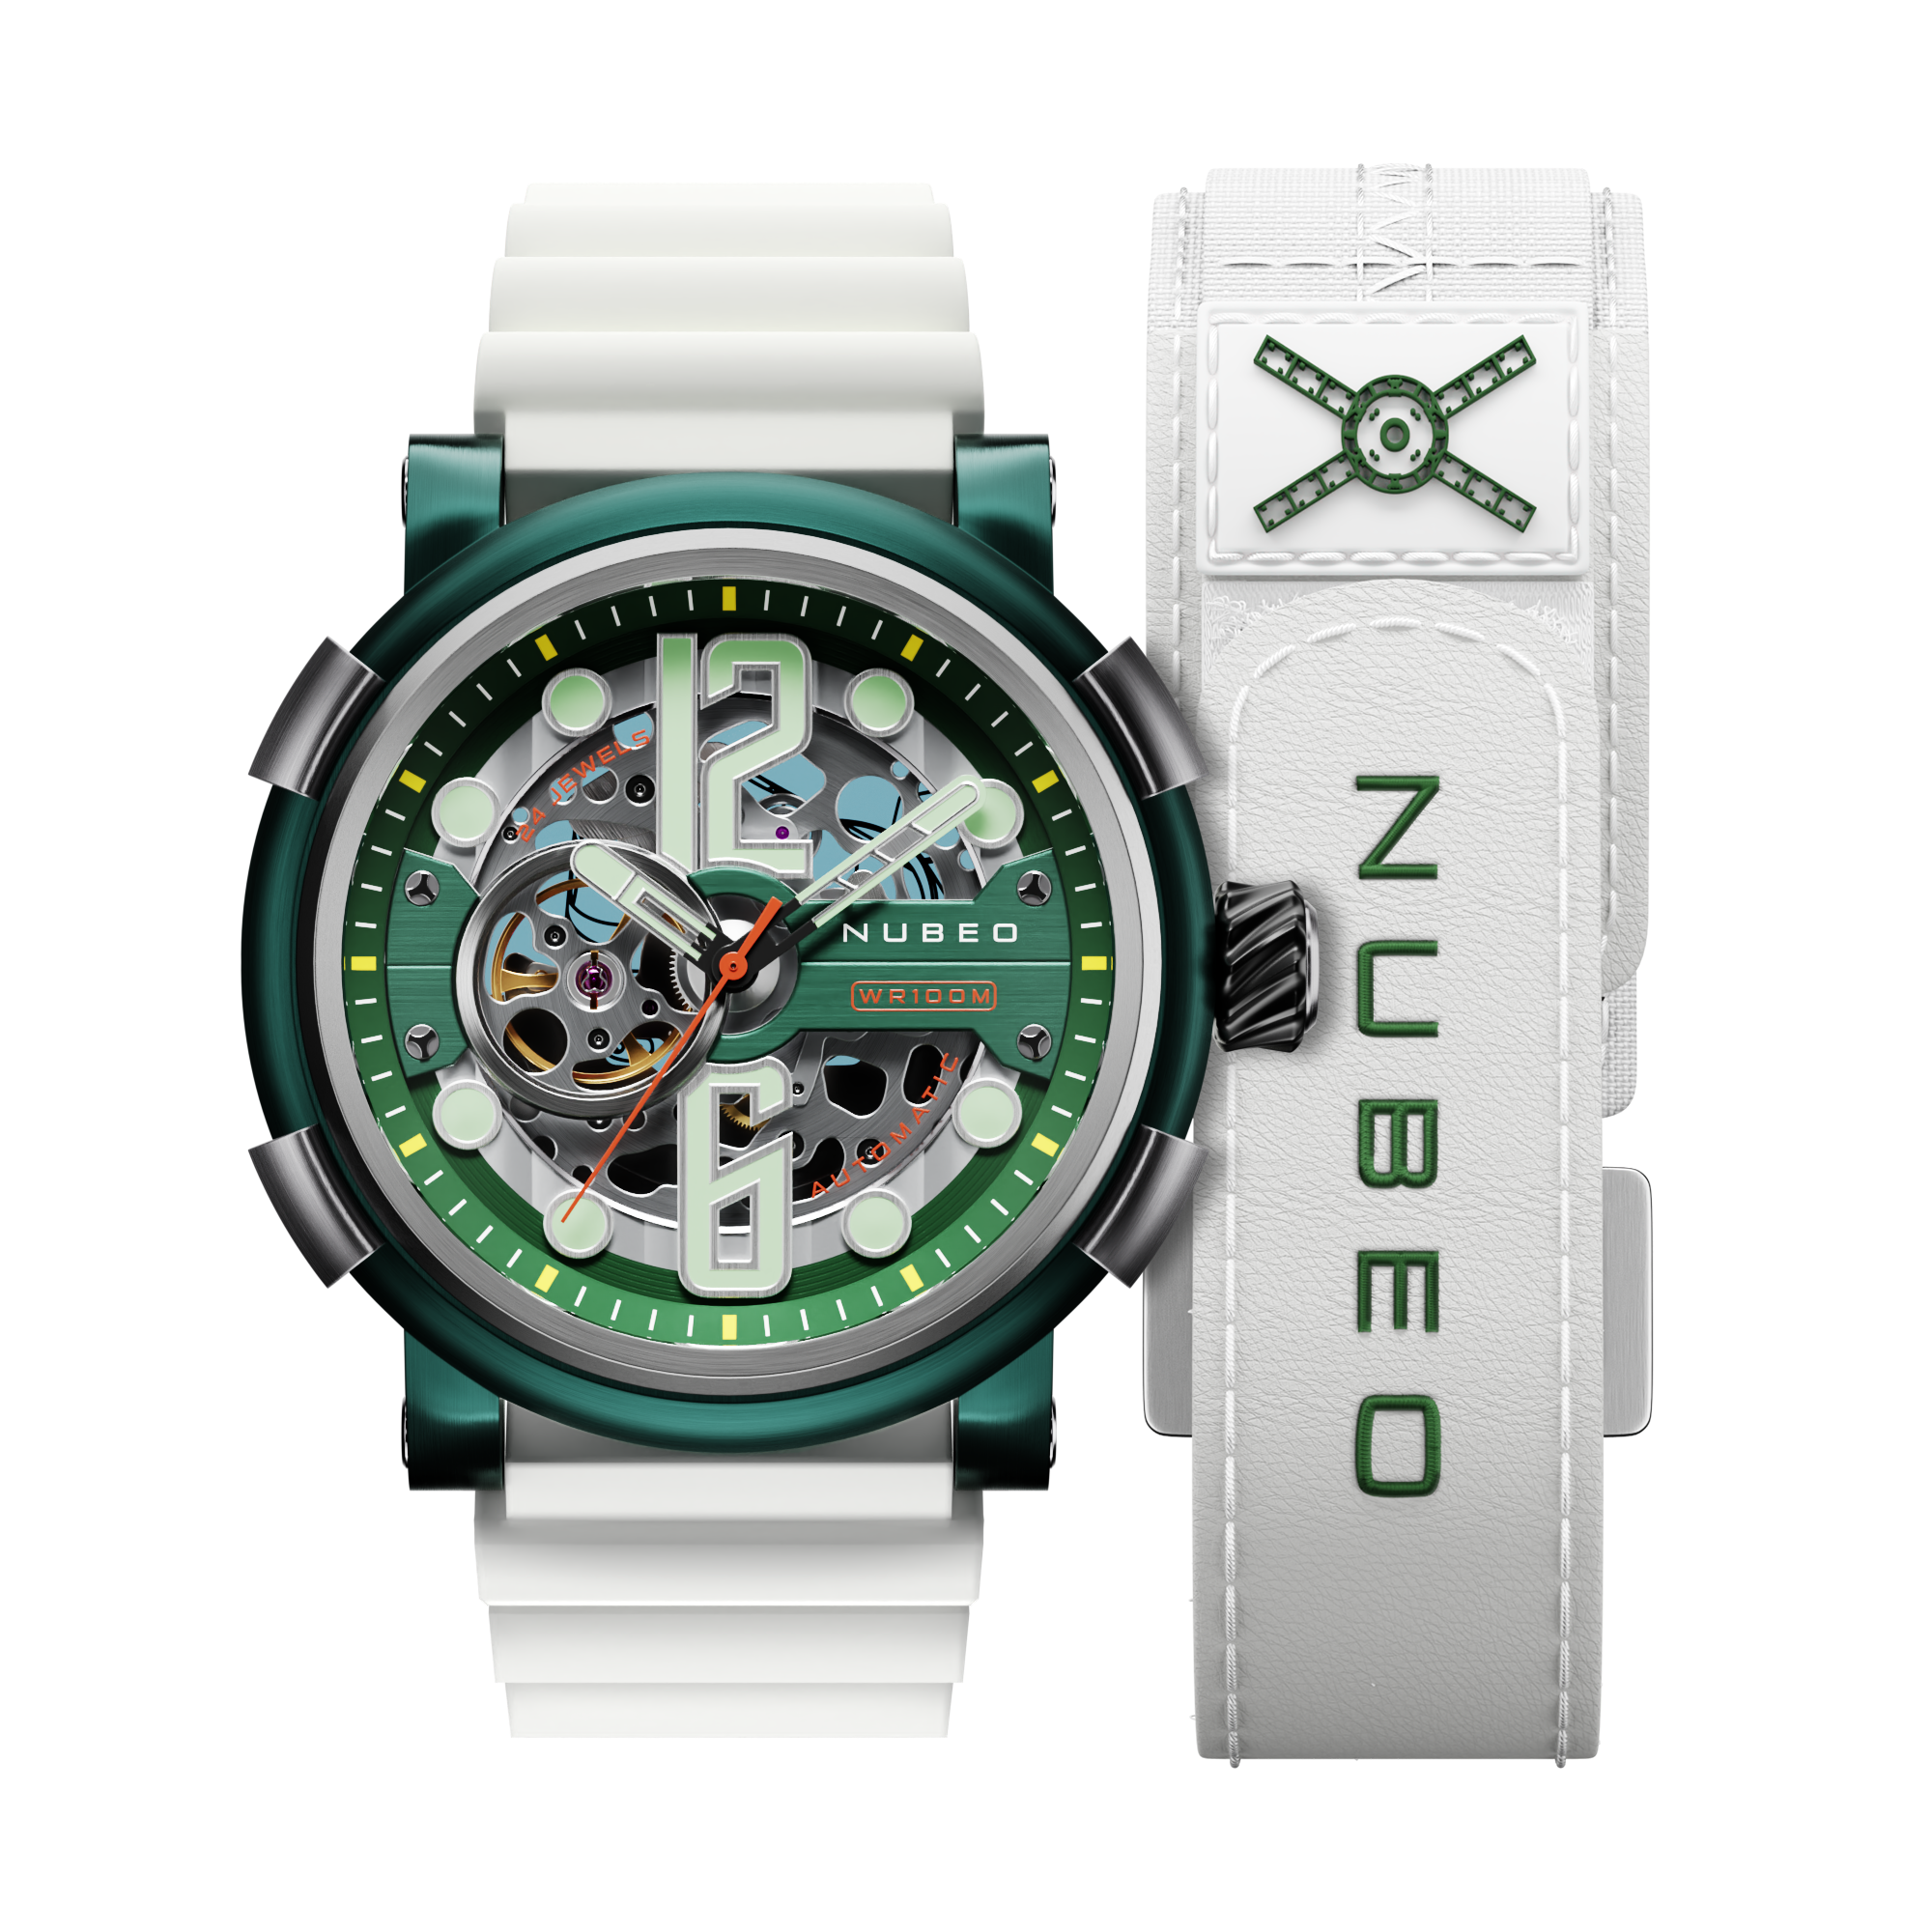 NUBEO Nubeo Space Orion Men's Japanese Automatic Green Watch NB-6062-02